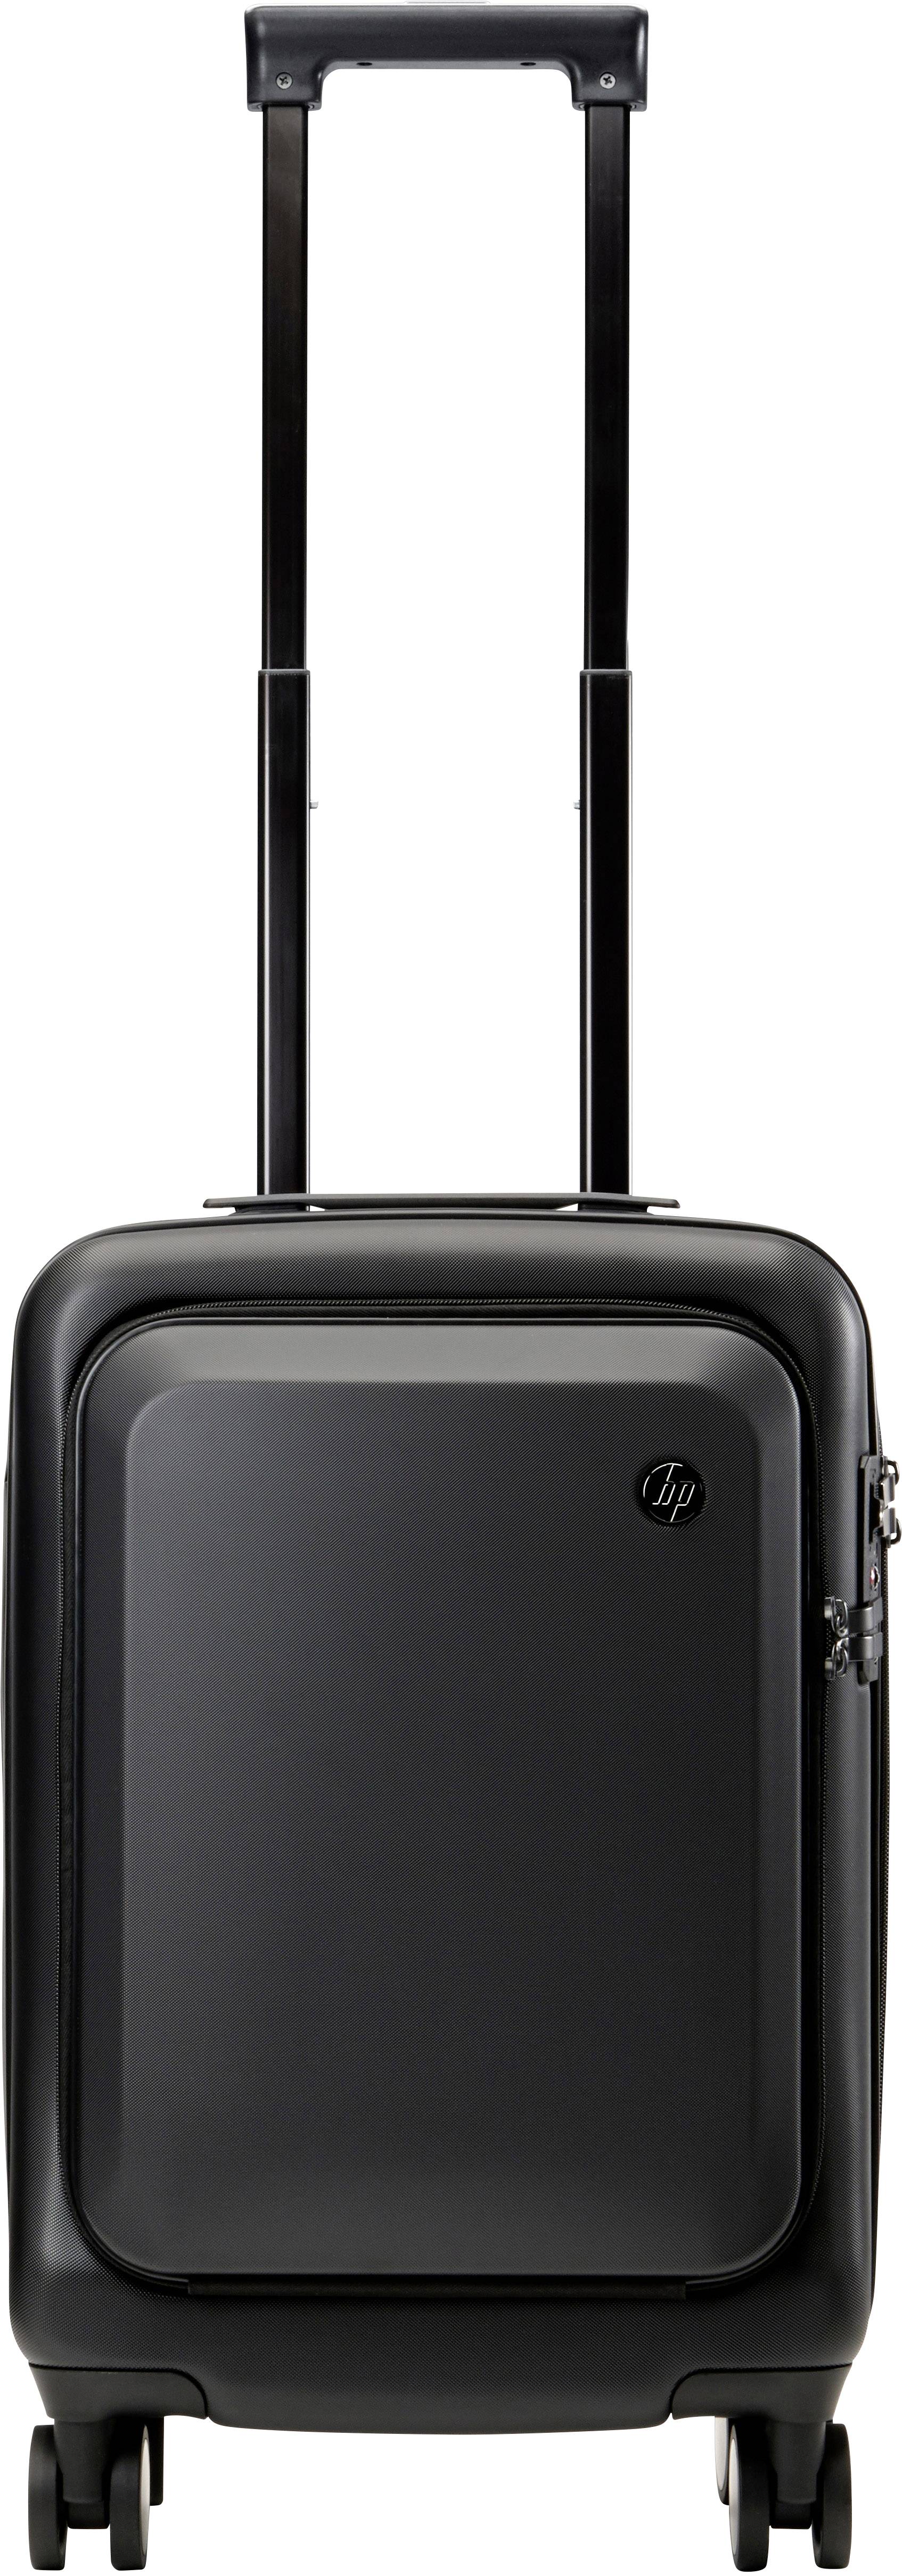 kasteel schuld seks HP Laptop trolley All in One Carry On Luggage Suitable for up to: 39,6 cm  (15,6") Black | Conrad.com